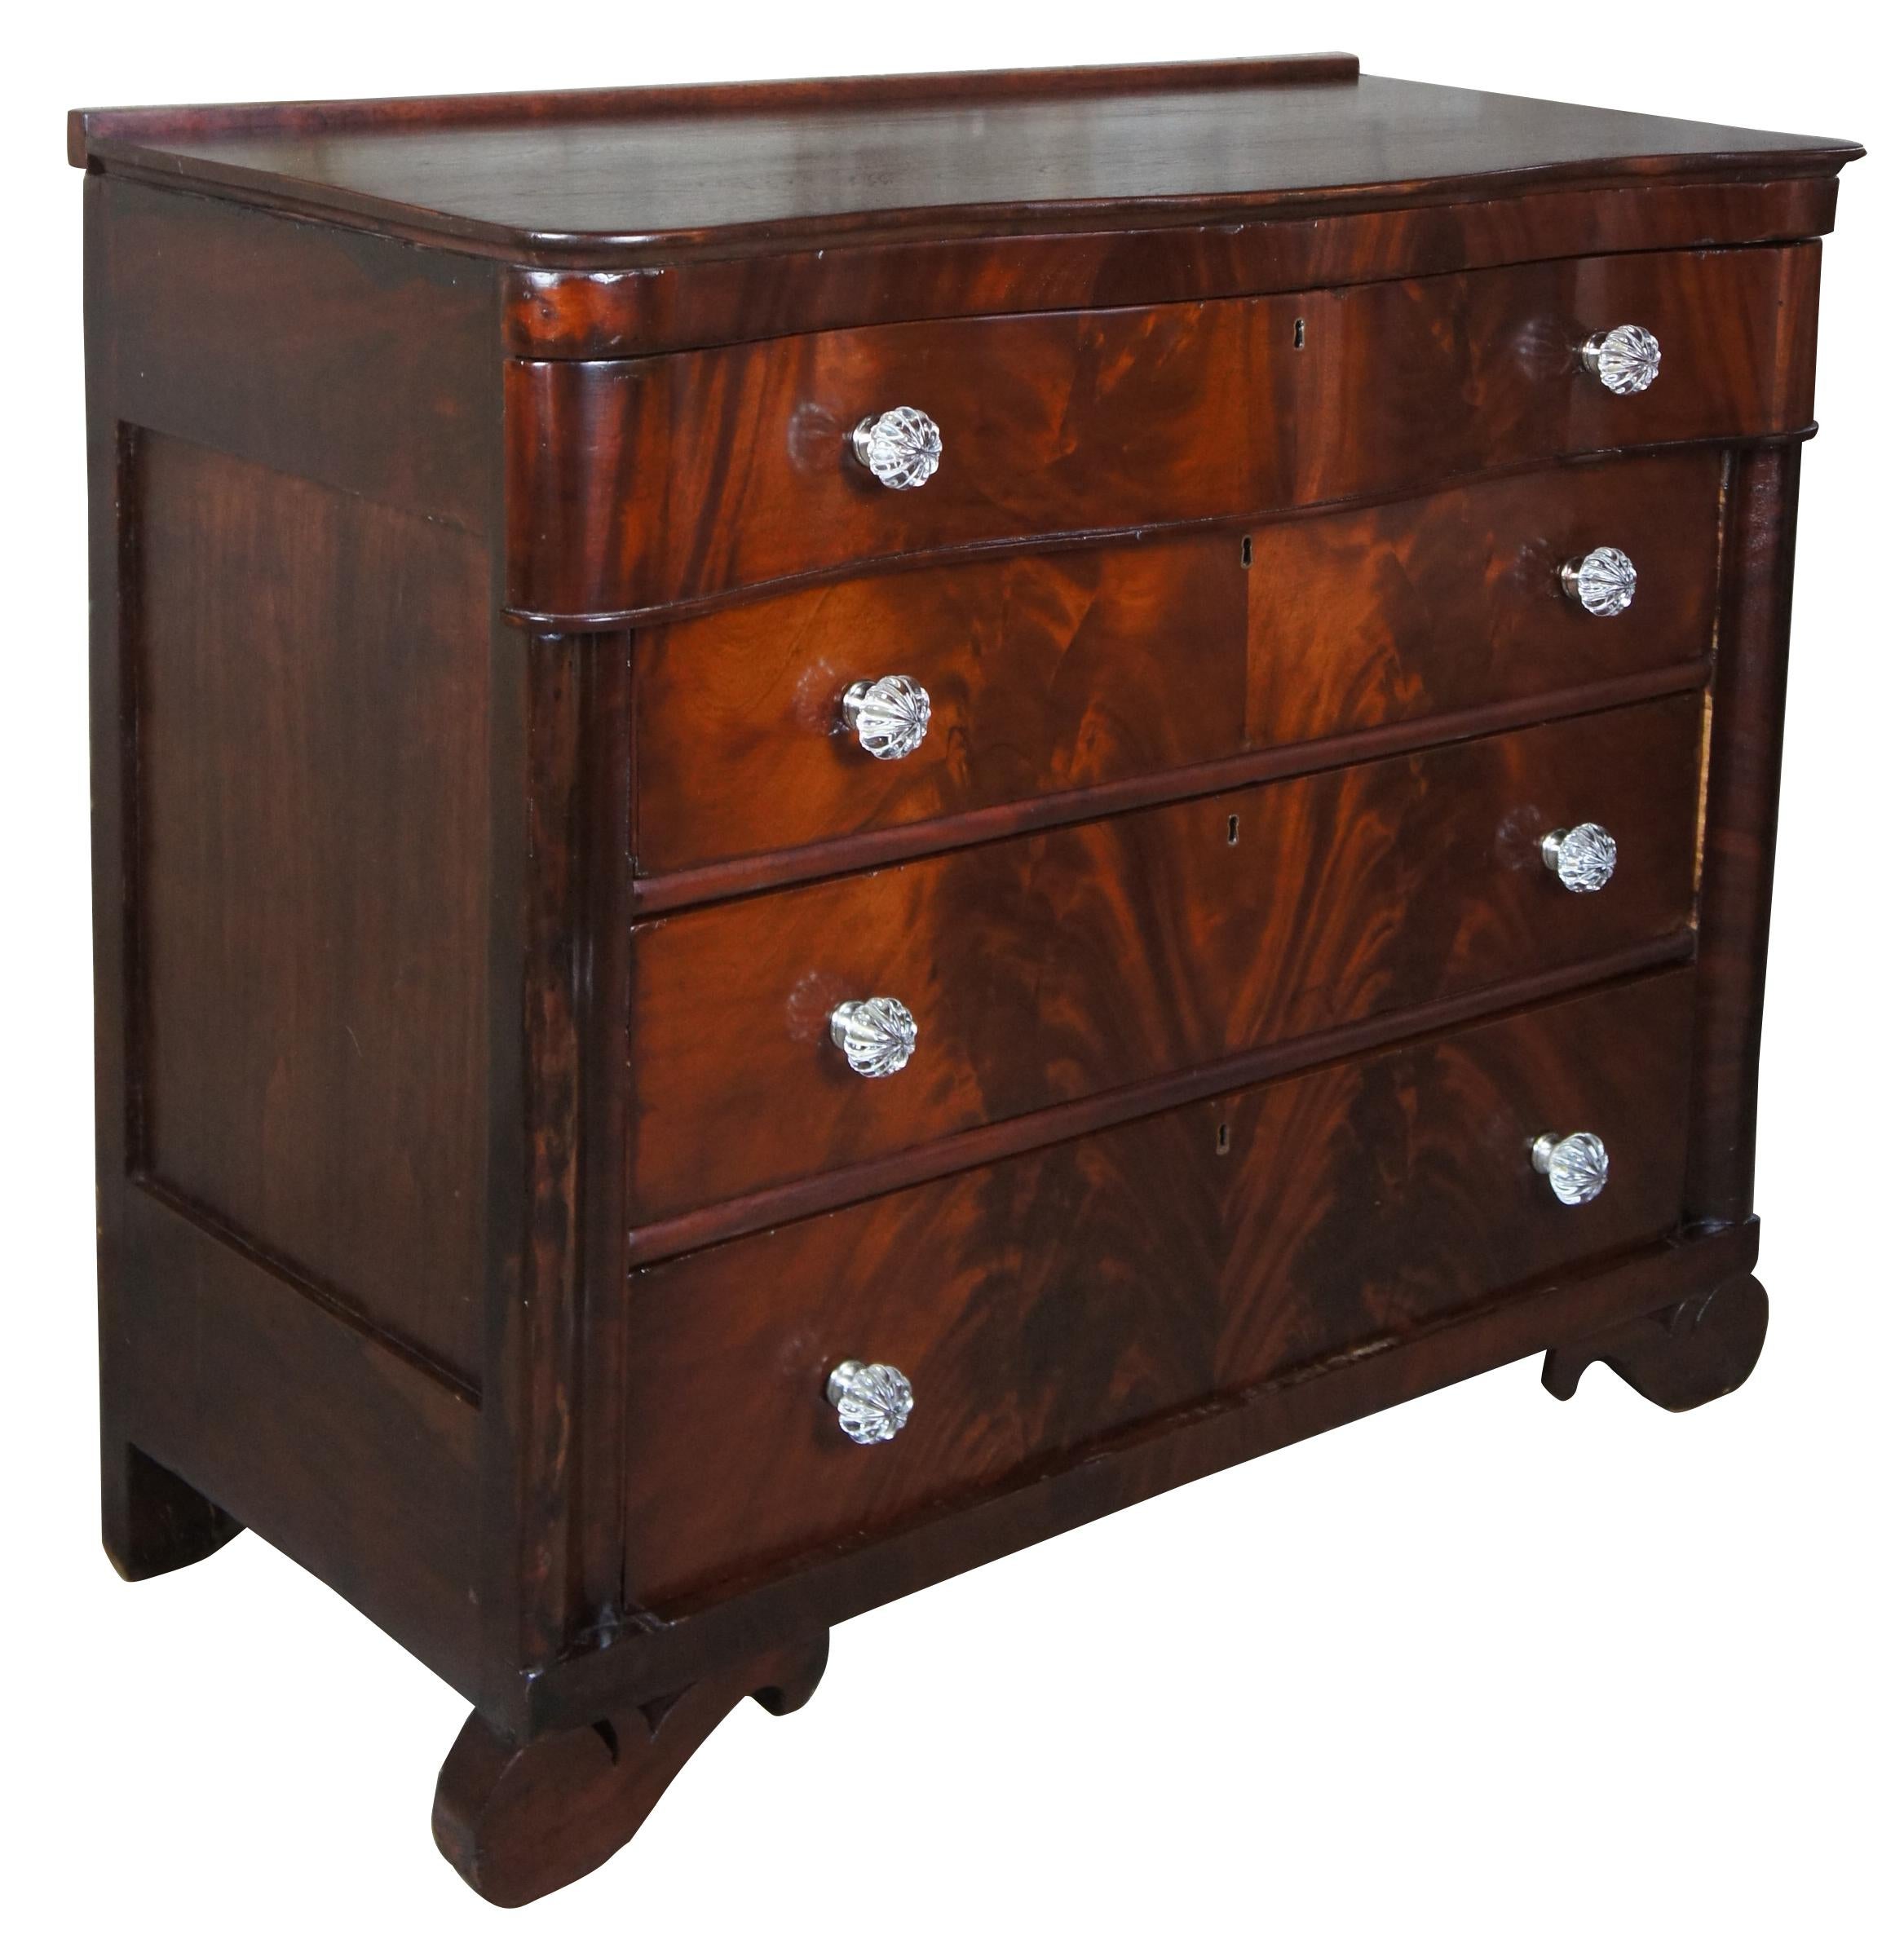 Antique American Empire flamed mahogany serpentine chest of drawers or dresser

Mid-19th century American Empire chest of four drawers. Perfect for use in bedroom or dining area. Features a serpentine front, lockable drawers and glass drawer